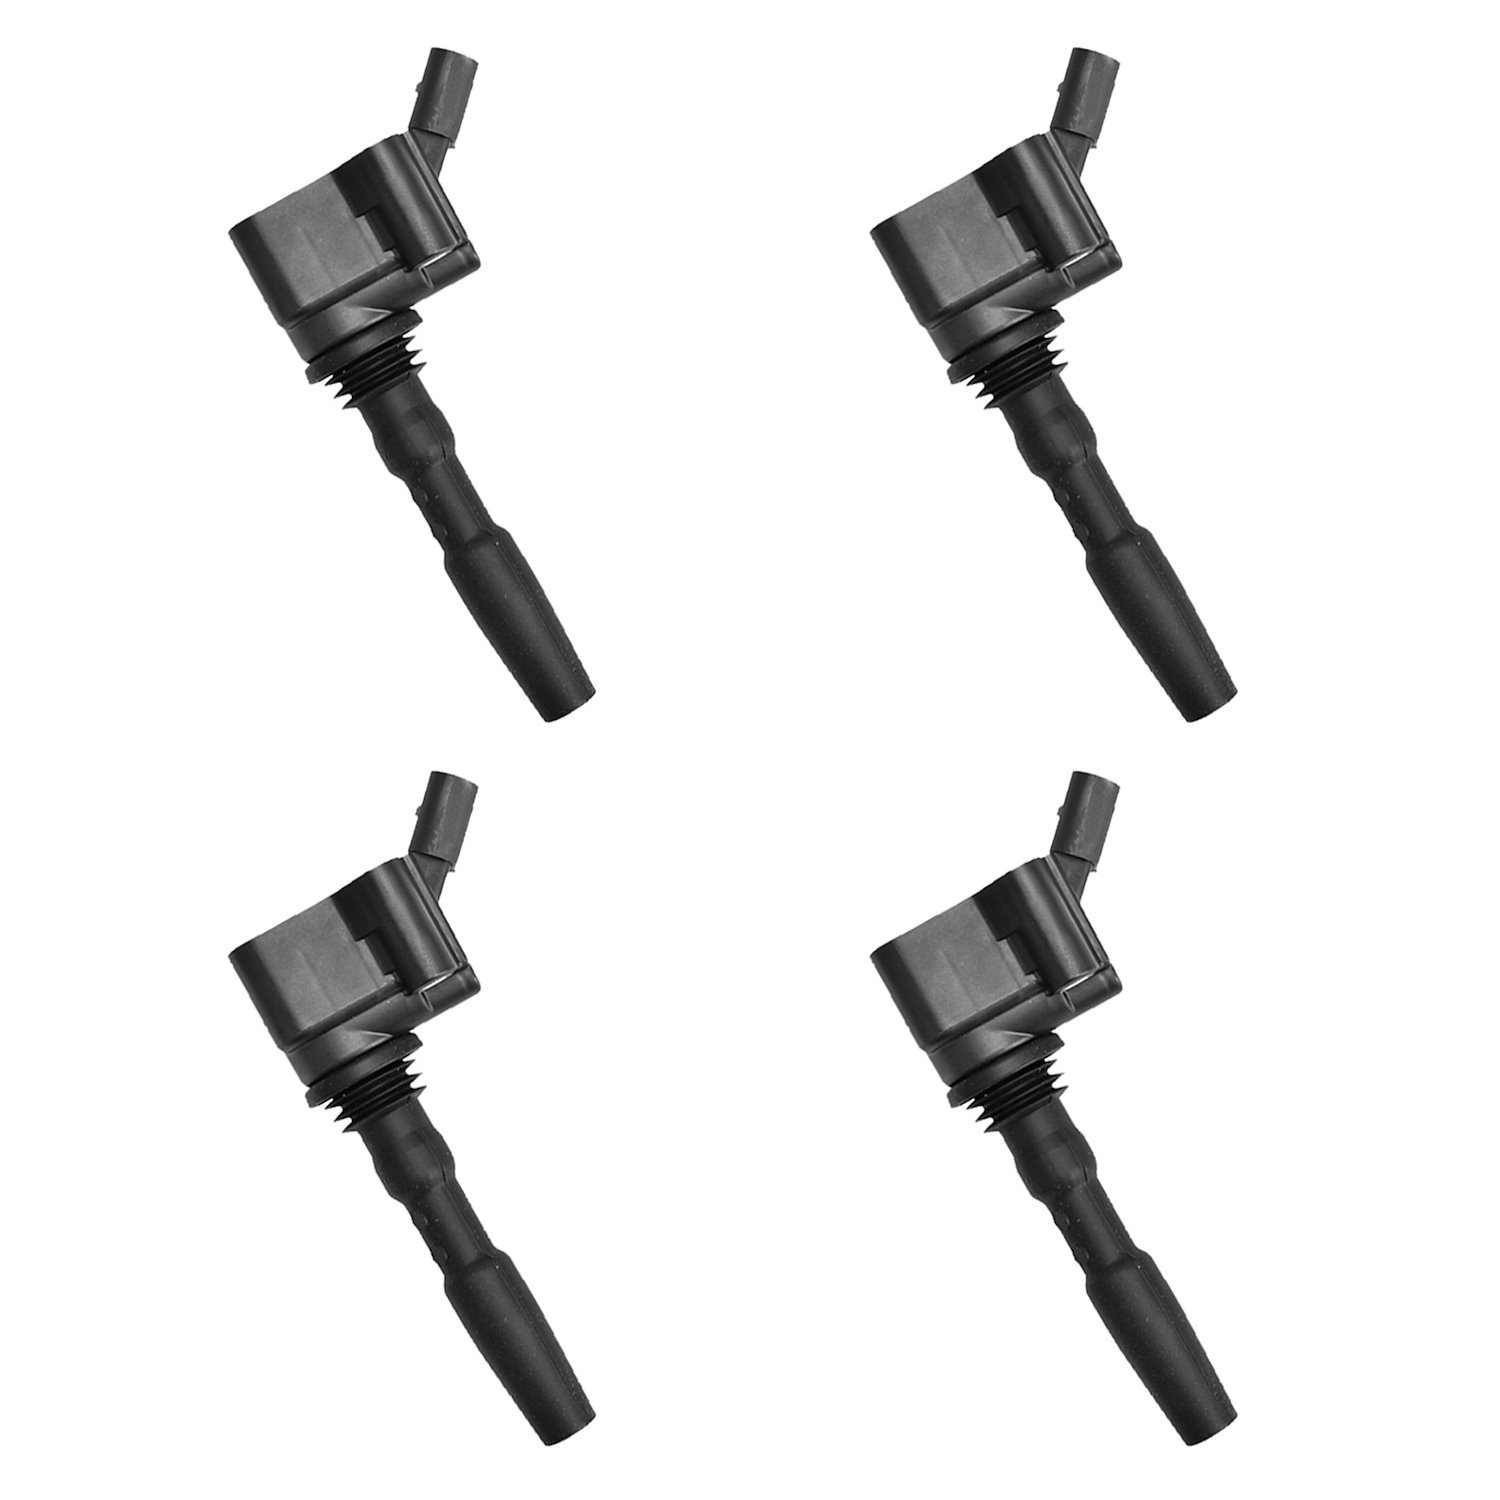 OE Replacement Ignition Coils for Volkswagen Jetta Audi A3